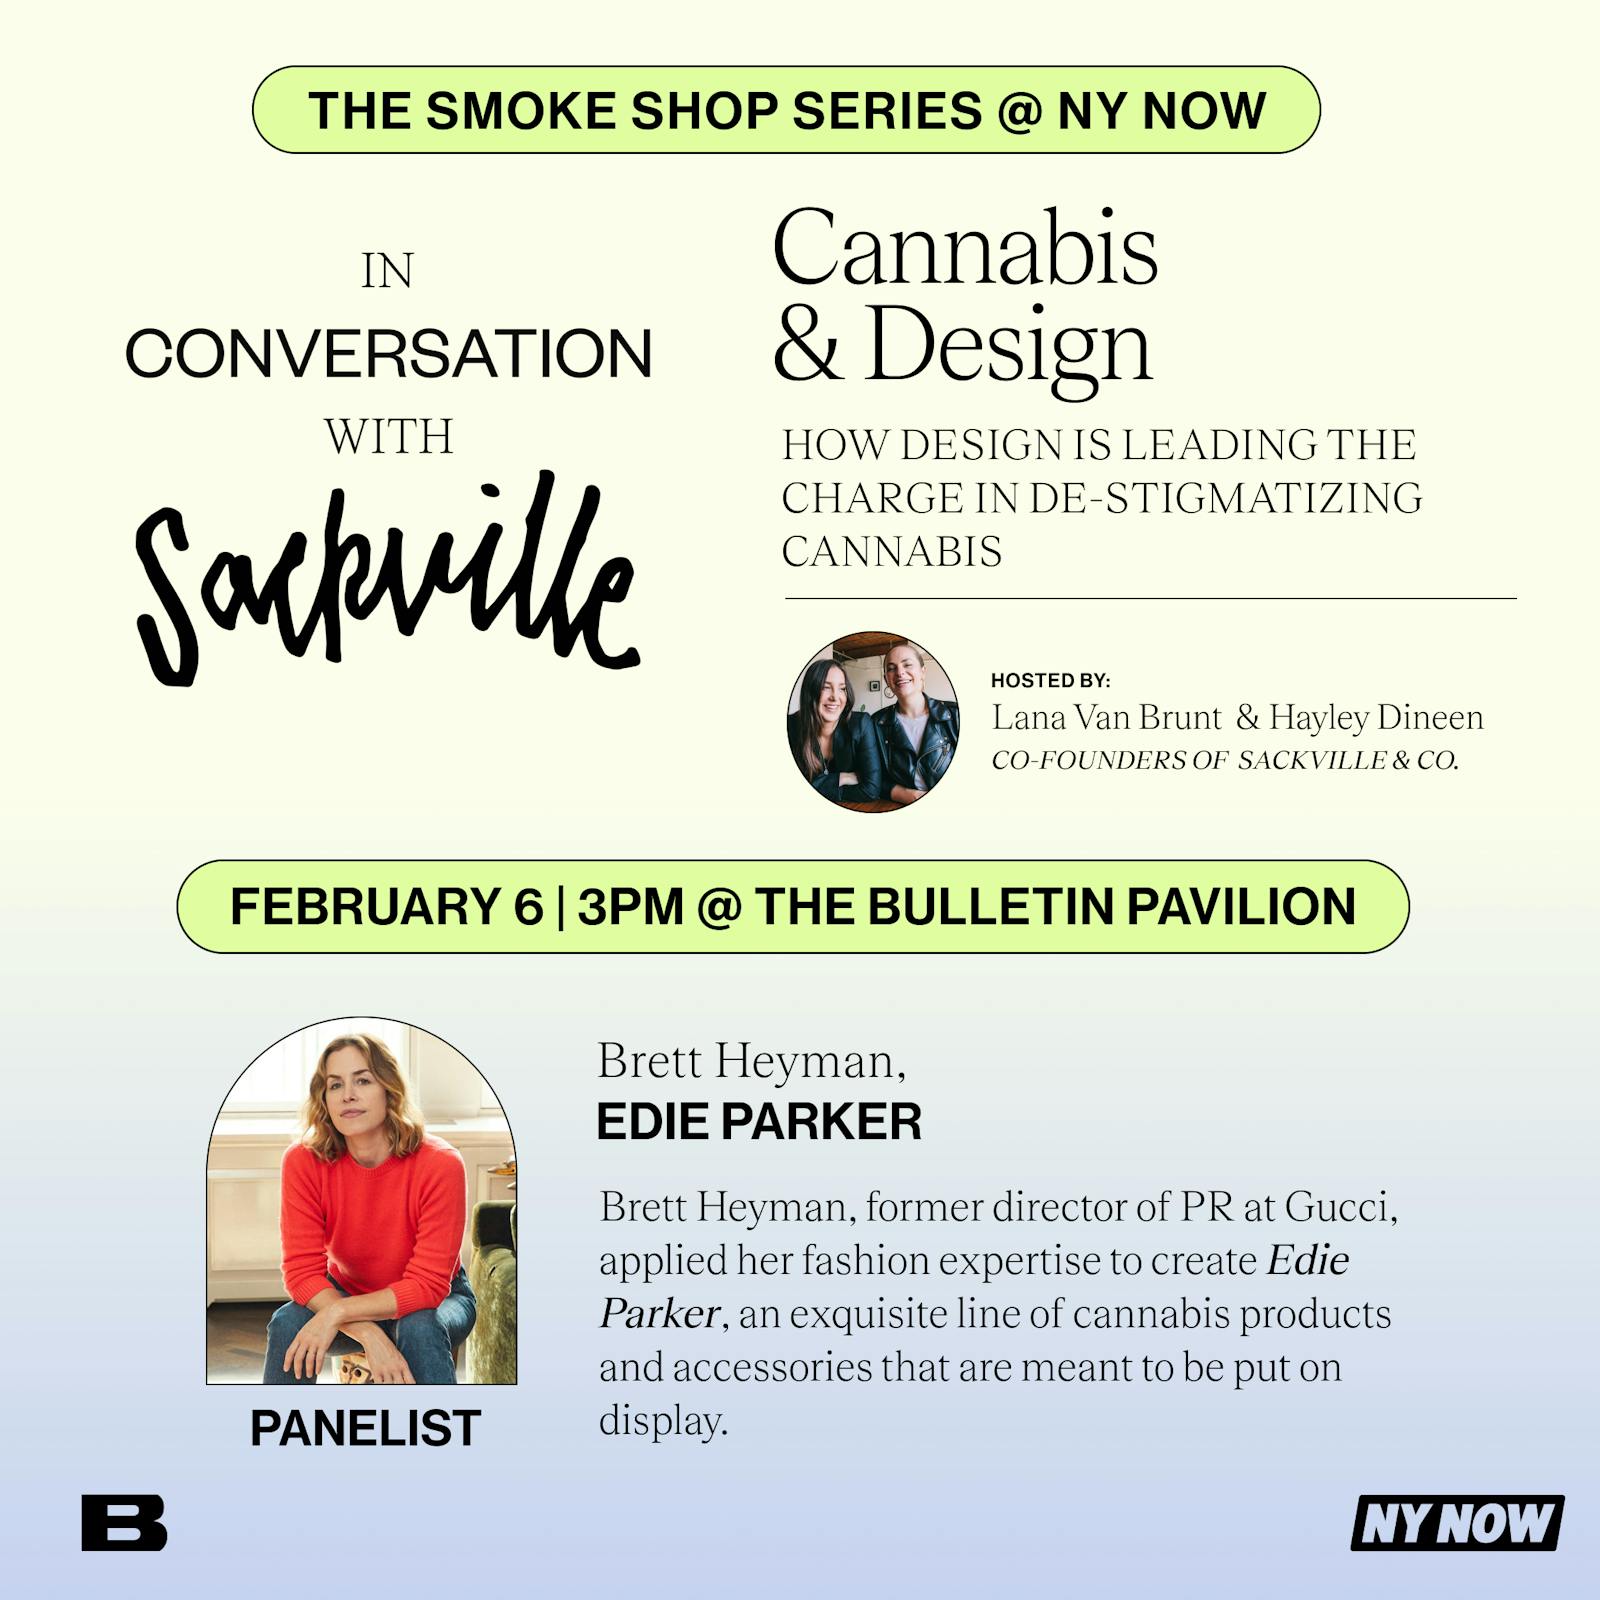 "How Design is Leading the Charge in De-Stigmatizing Cannabis" with Brett Heyman (Edie Parker) – The Smoke Shop Series @ NY NOW